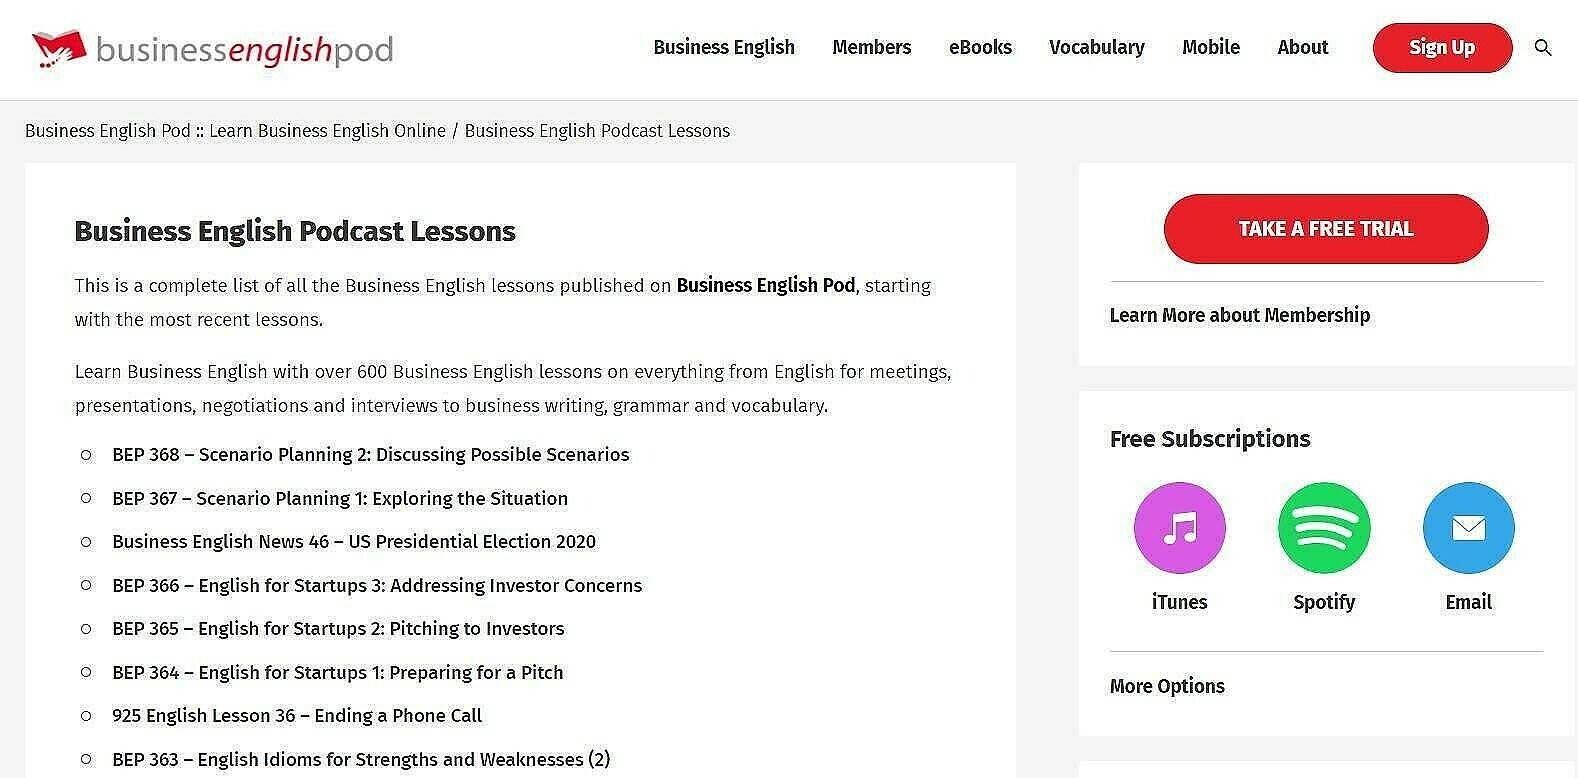 business english podcast lessons